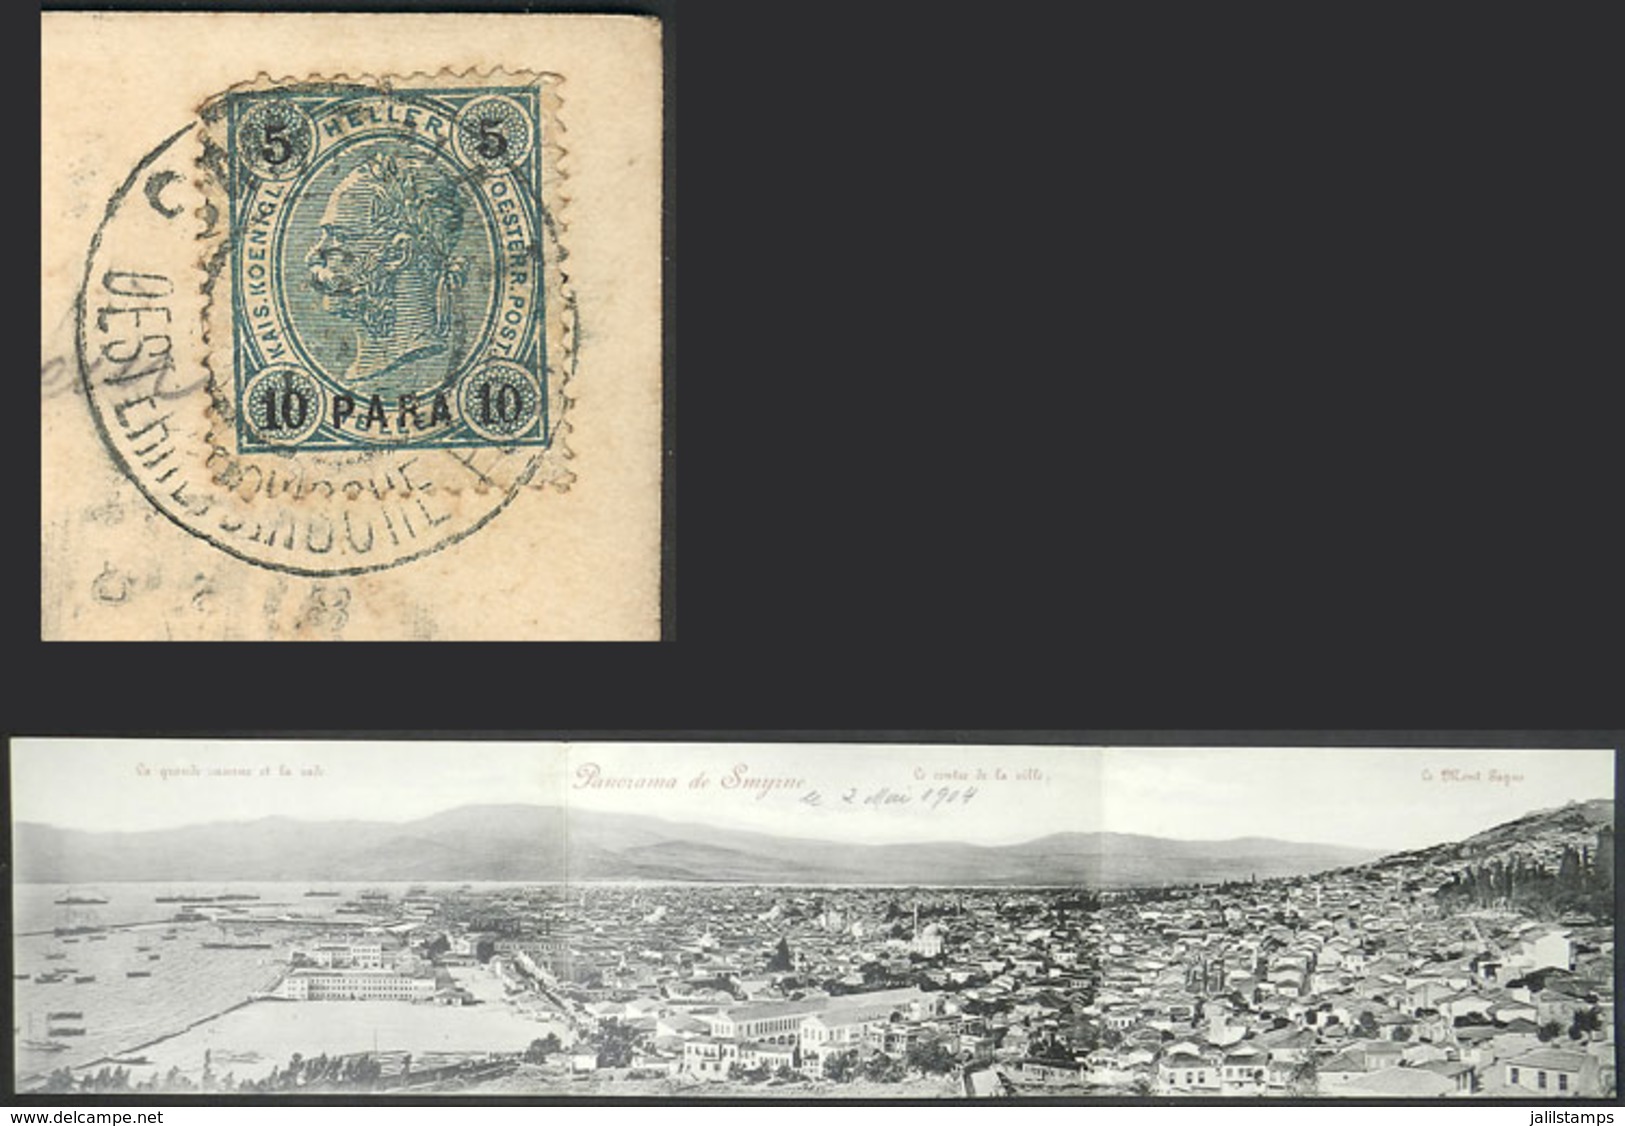 TURKEY: SMYRNA: Panorama Of The City, TRIPLE Postcard Sent On 2/MAY/1904 From The Austrian Offices In Smyrna To Wien, Fr - Turchia